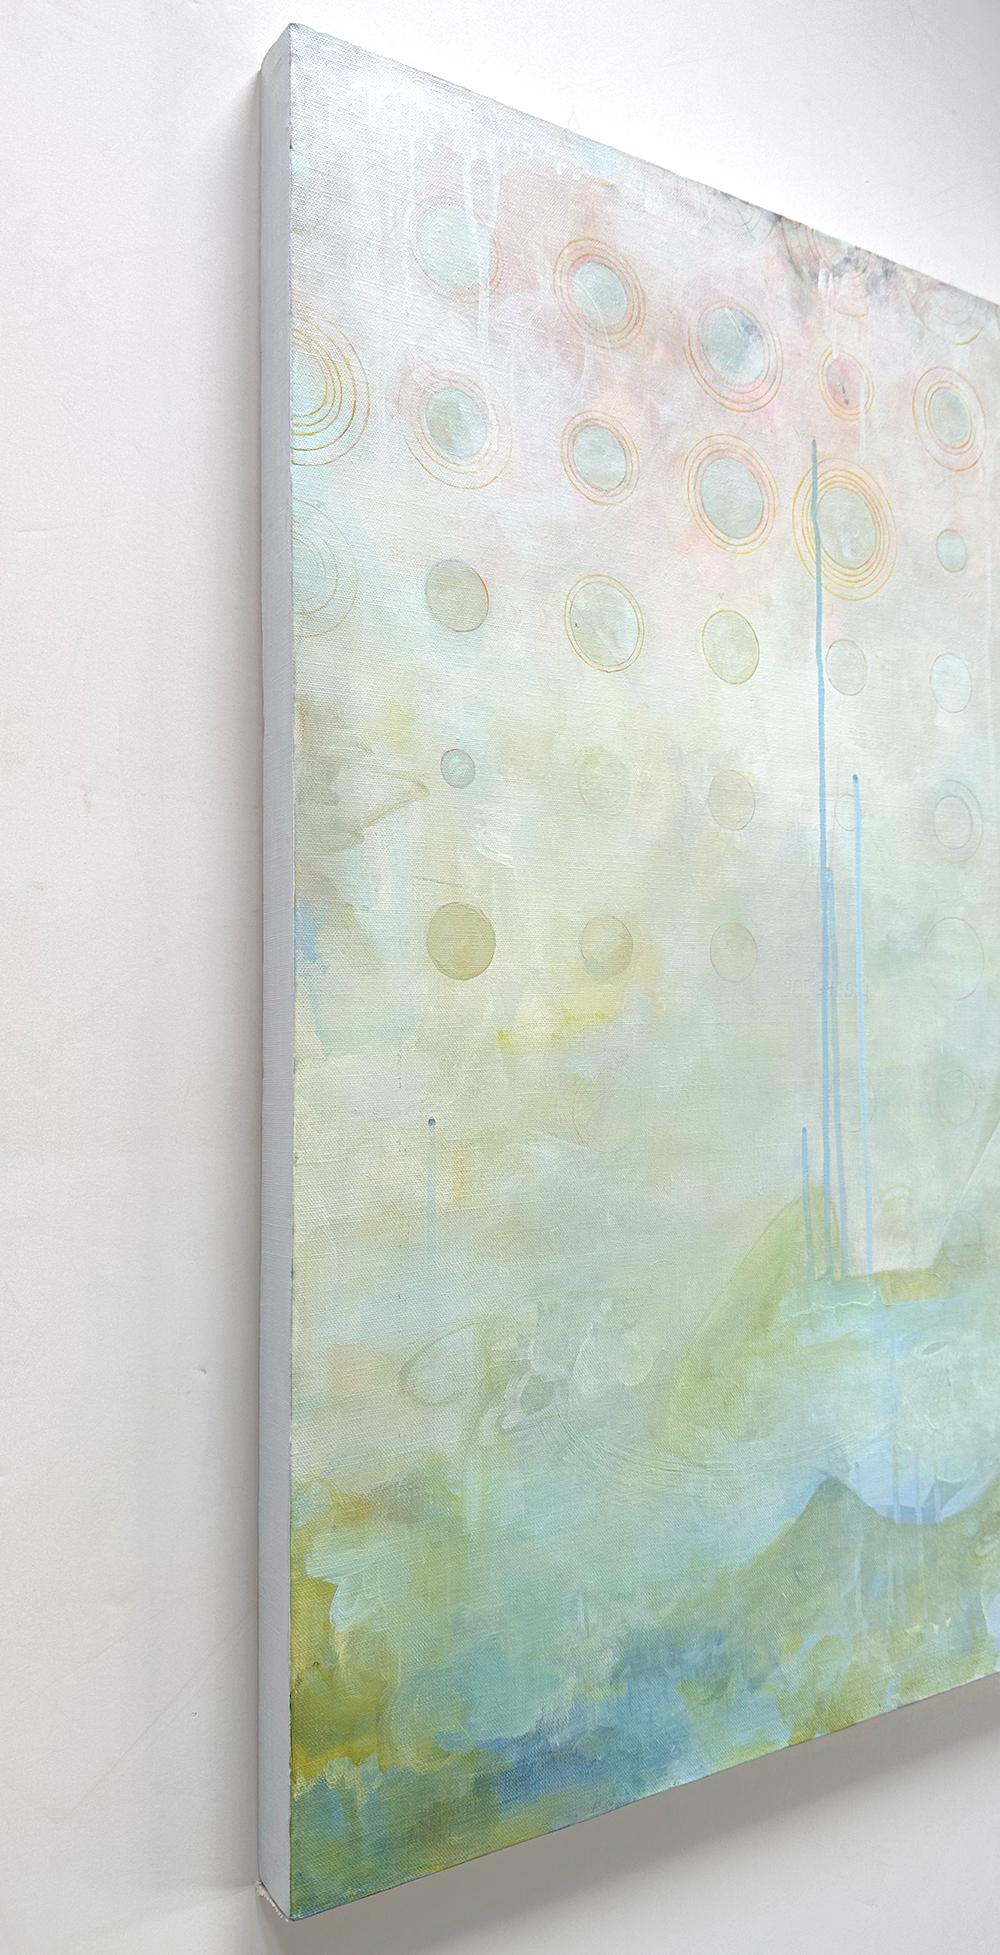 Sandra Cohen’s “Hi-hat Kabbalah” is a 30 x 24 x 1.5 inch acrylic painting on canvas, painted loosely in a light spring palette of blue, green, pink, and white, with sharp concentric circles fading into the center from the top. Where sky meets water